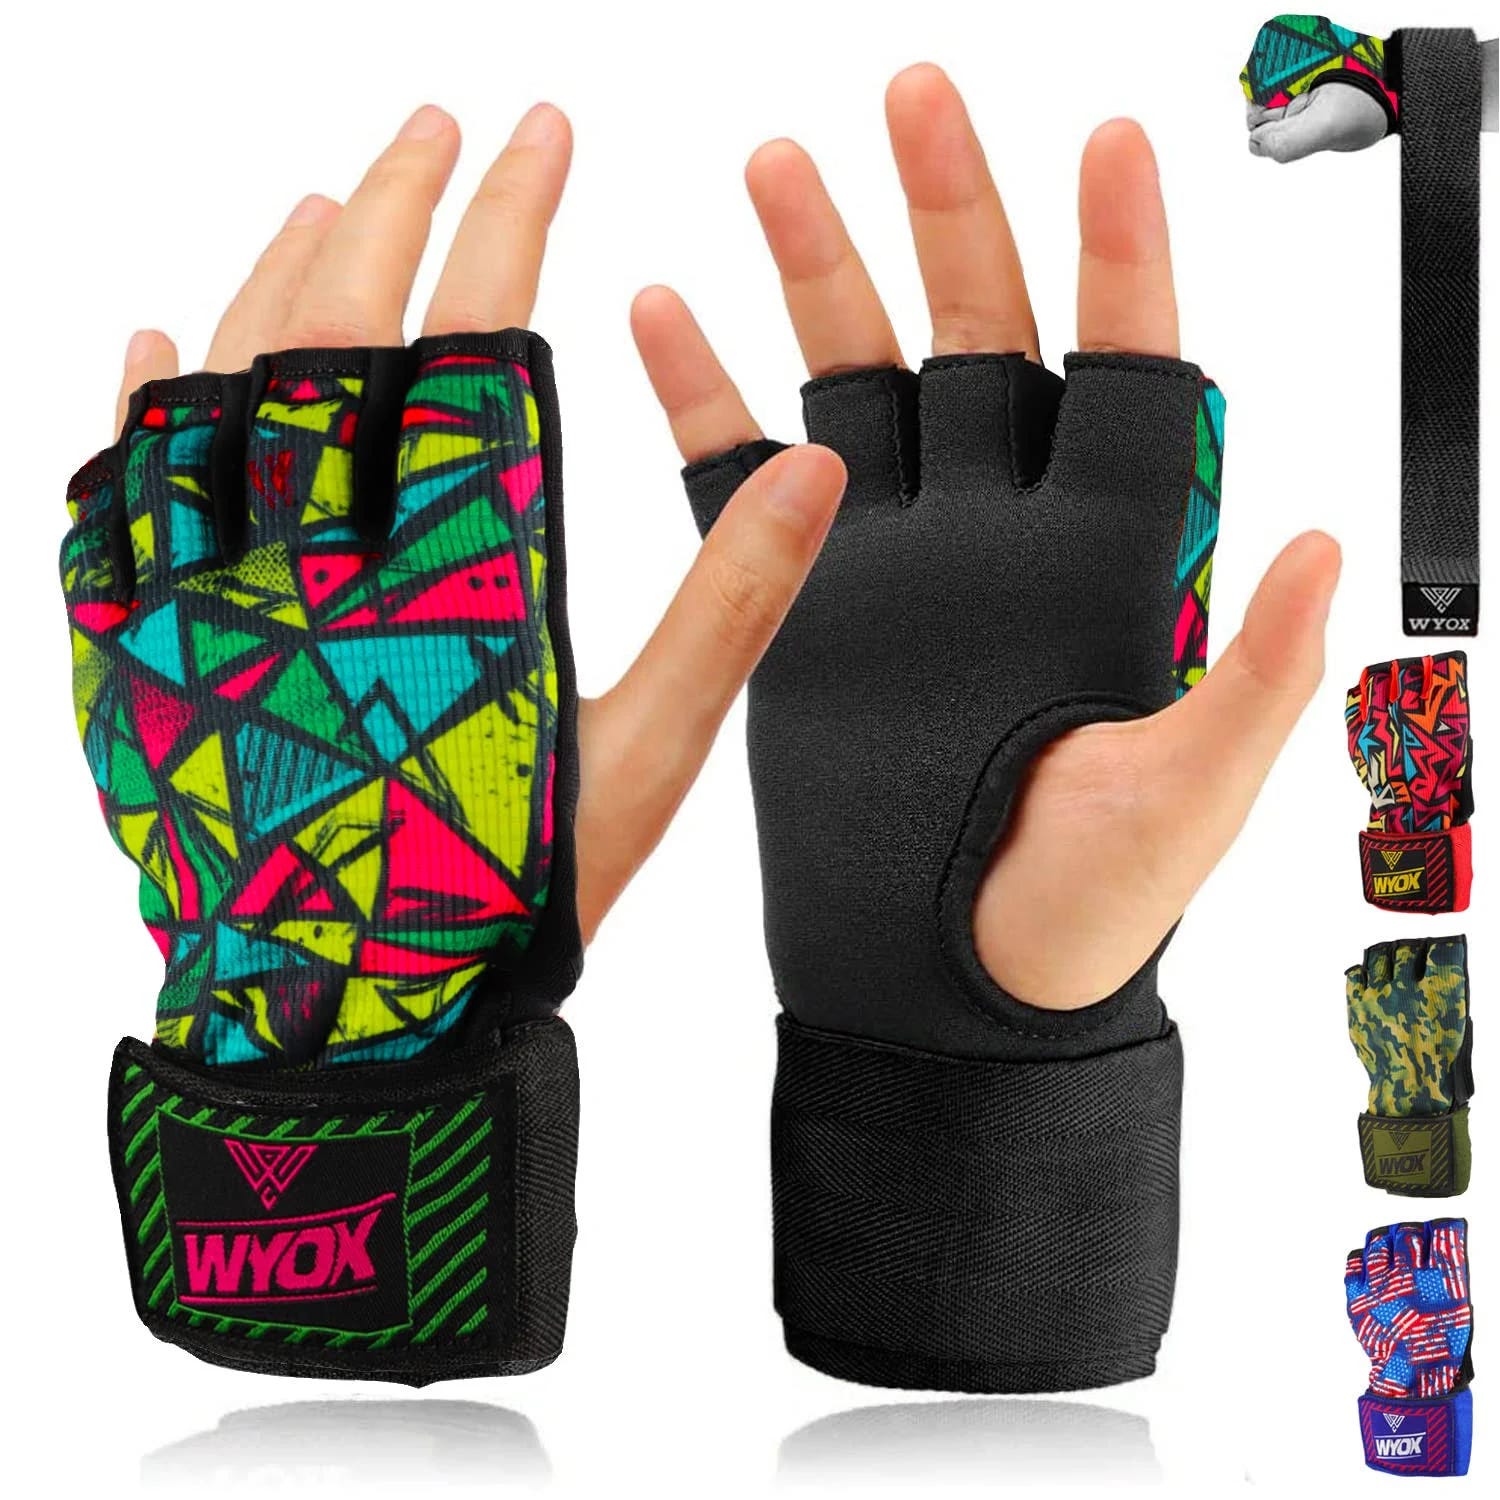 WYOX Padded Inner Gloves for Boxing: Enhanced Protection & Comfort | Image